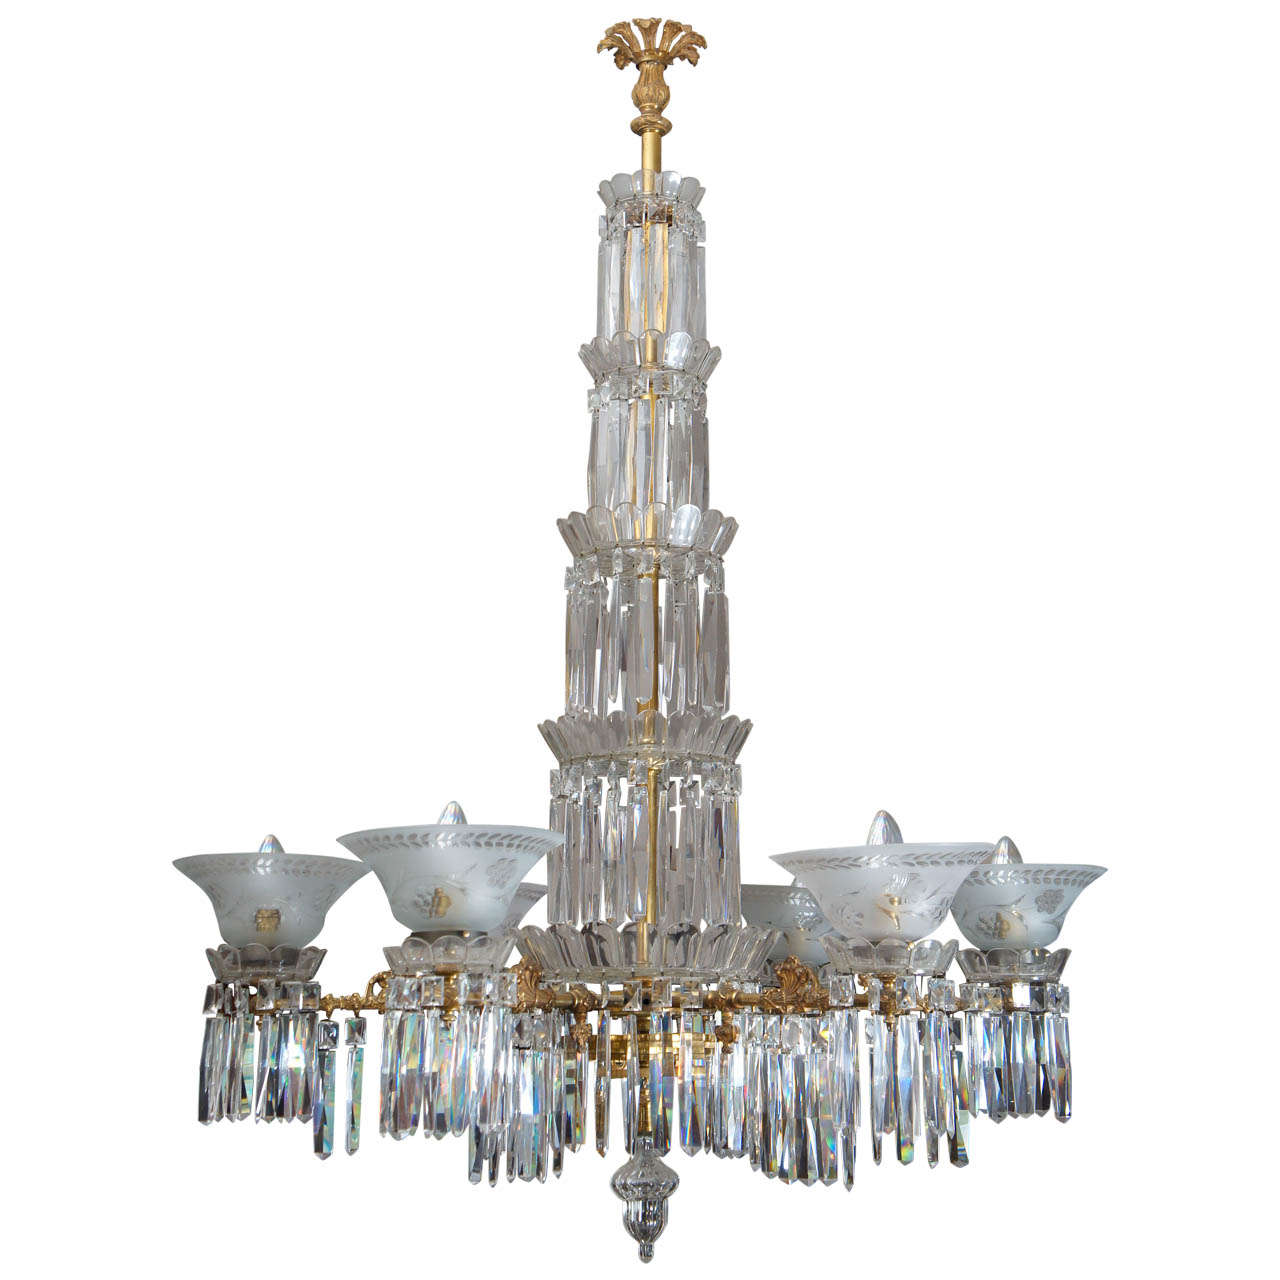 19th c. American Cut Crystal and Gilt Bronze 6 Light Gasolier/Chandelier